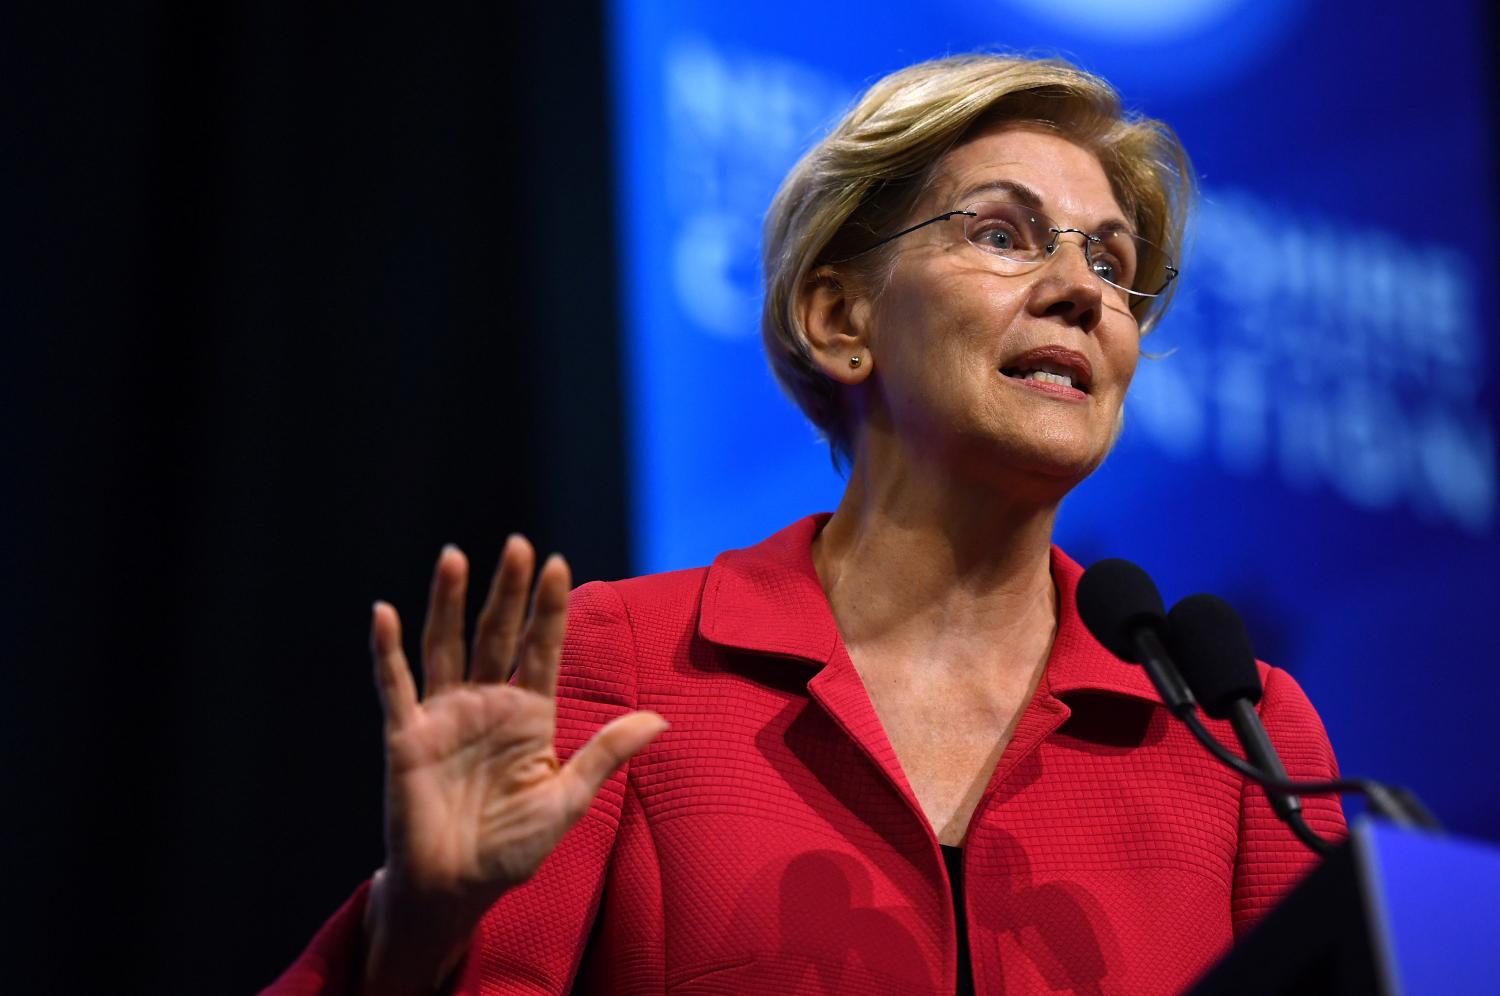 Democratic 2020 U.S. presidential candidate and U.S. Senator Elizabeth Warren (D-MA) speaks at the New Hampshire Democratic Party state convention in Manchester, New Hampshire, U.S. September 7, 2019.      REUTERS/Gretchen Ertl - RC11A0B565F0